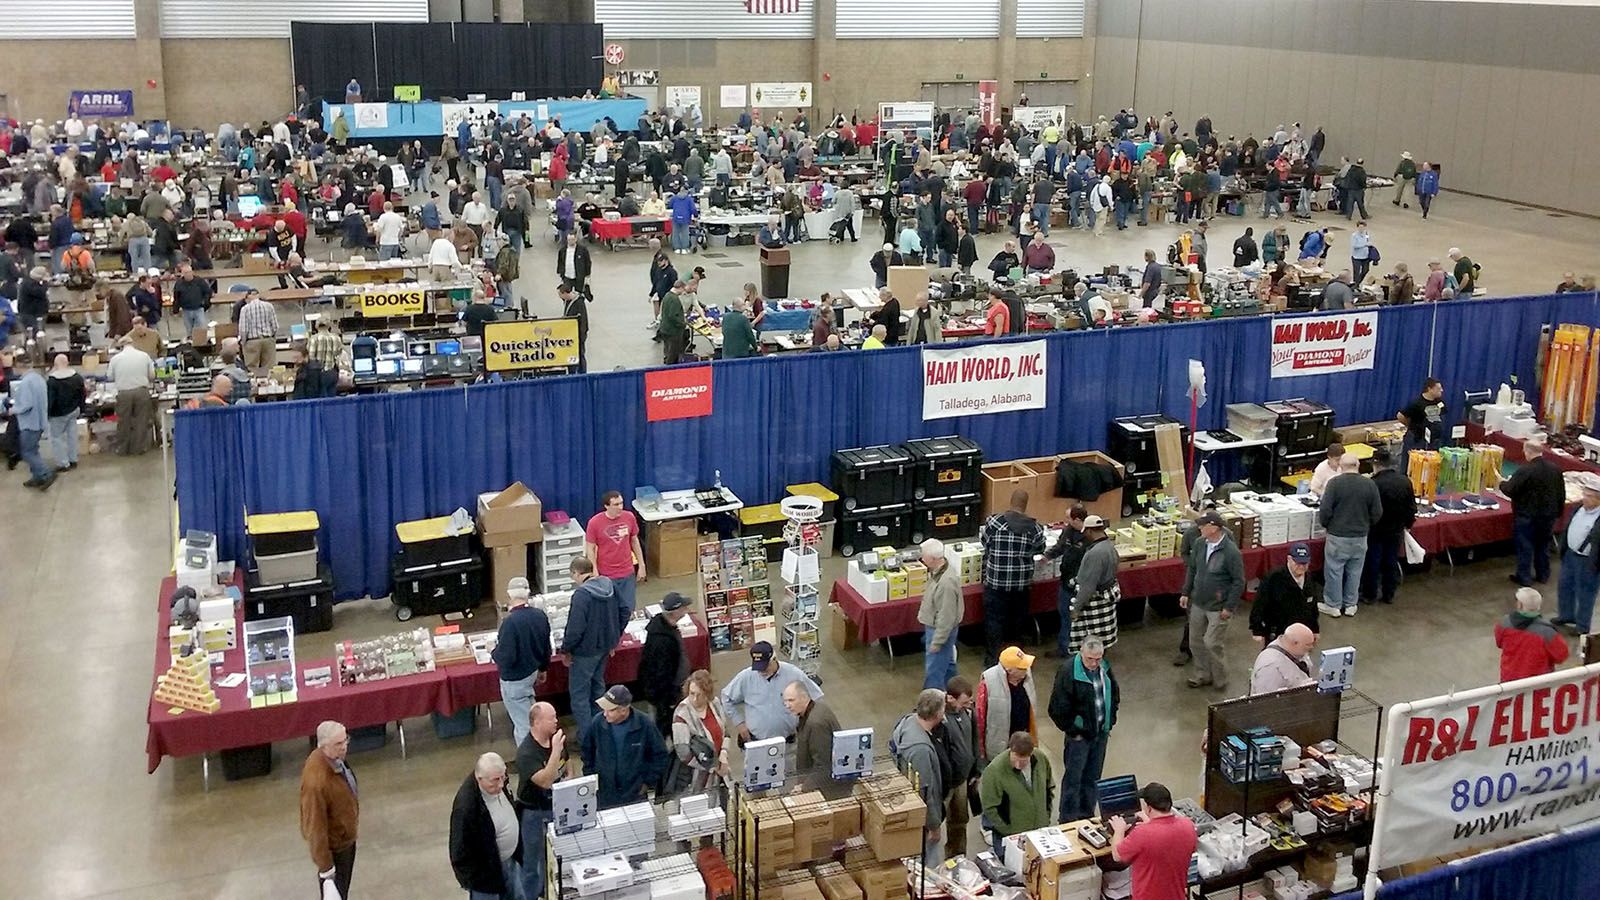 Fort Wayne HamFest & Computer Expo will be at Memorial Coliseum from Nov. 19-20.